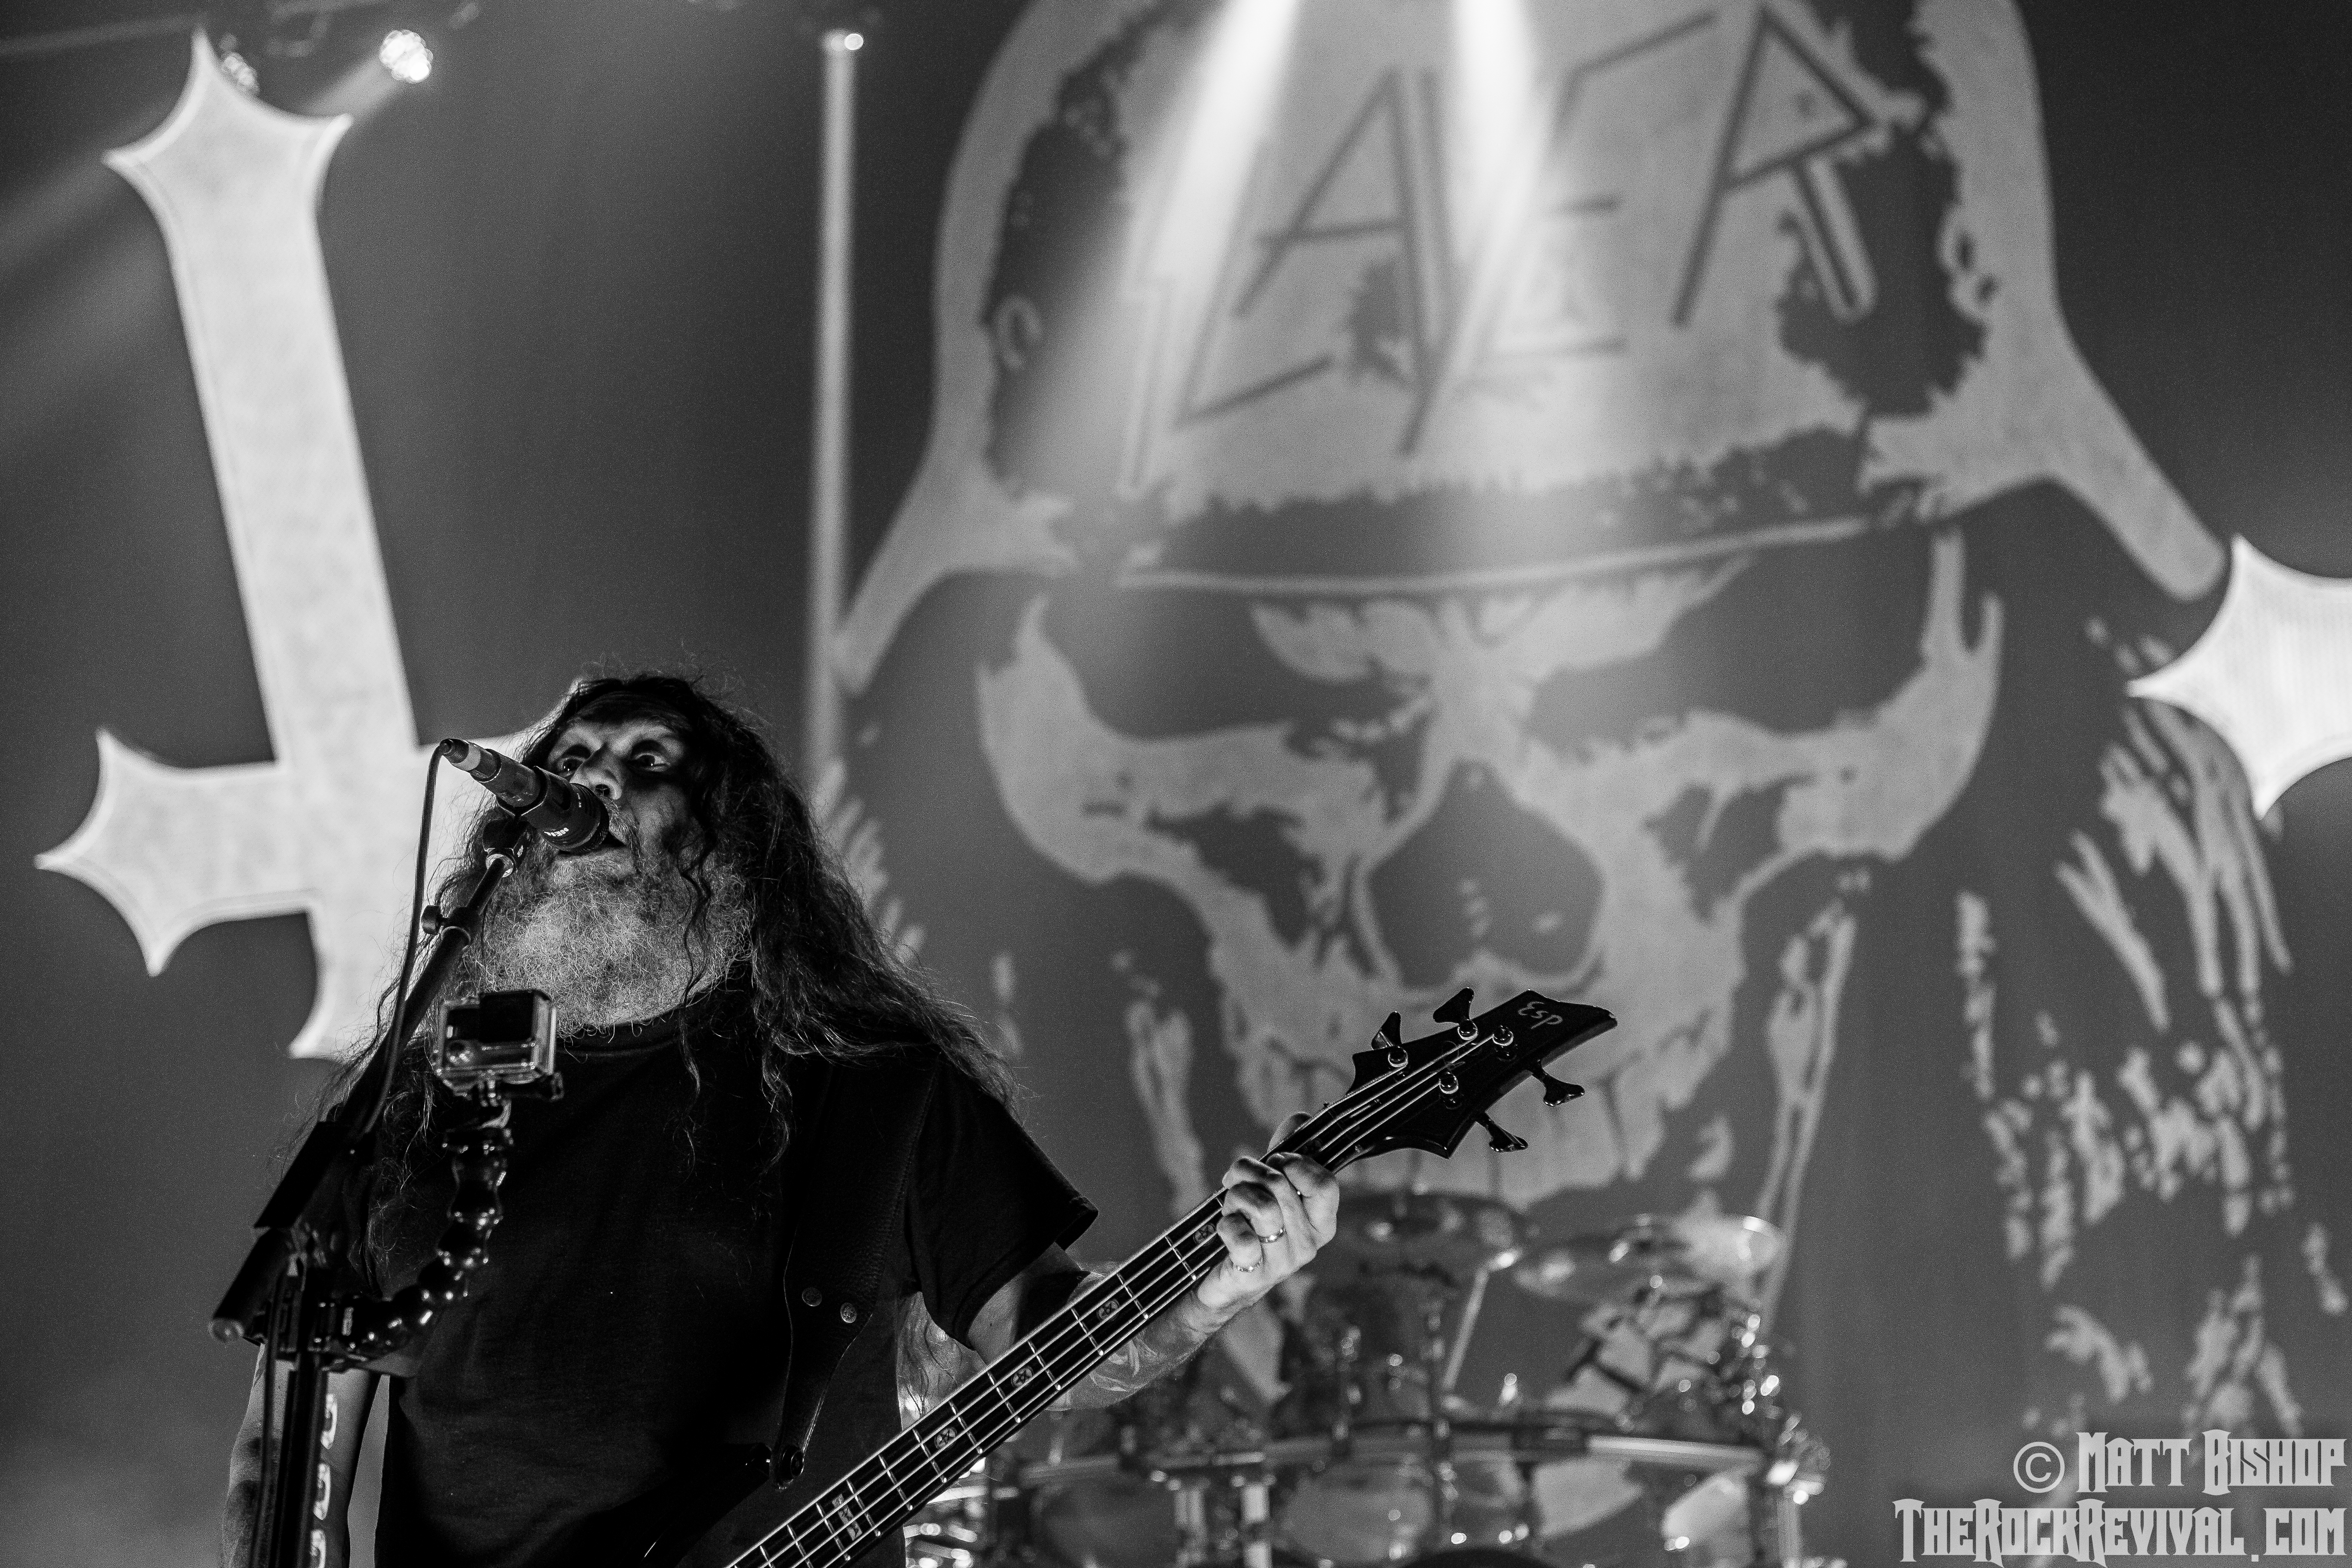 SLAYER PREMIERE NEW MUSIC VIDEO FOR “YOU AGAINST YOU”